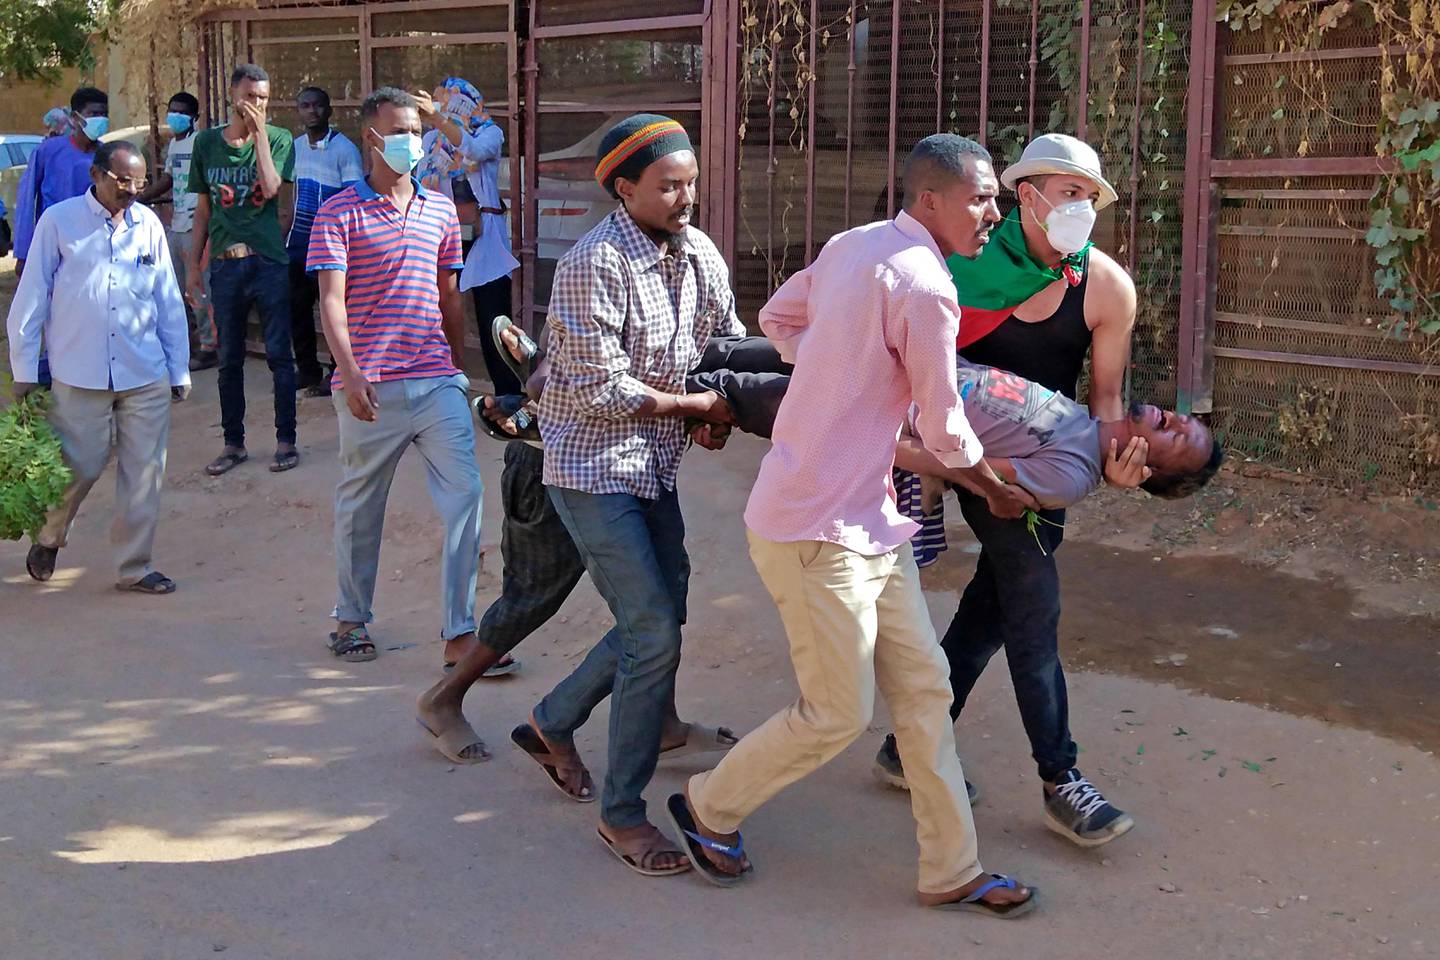 Sudanese protesters carry a wounded man away from clashes with security forces in Khartoum's twin city of Umm Durman, where violence is continuing on the streets. AFP